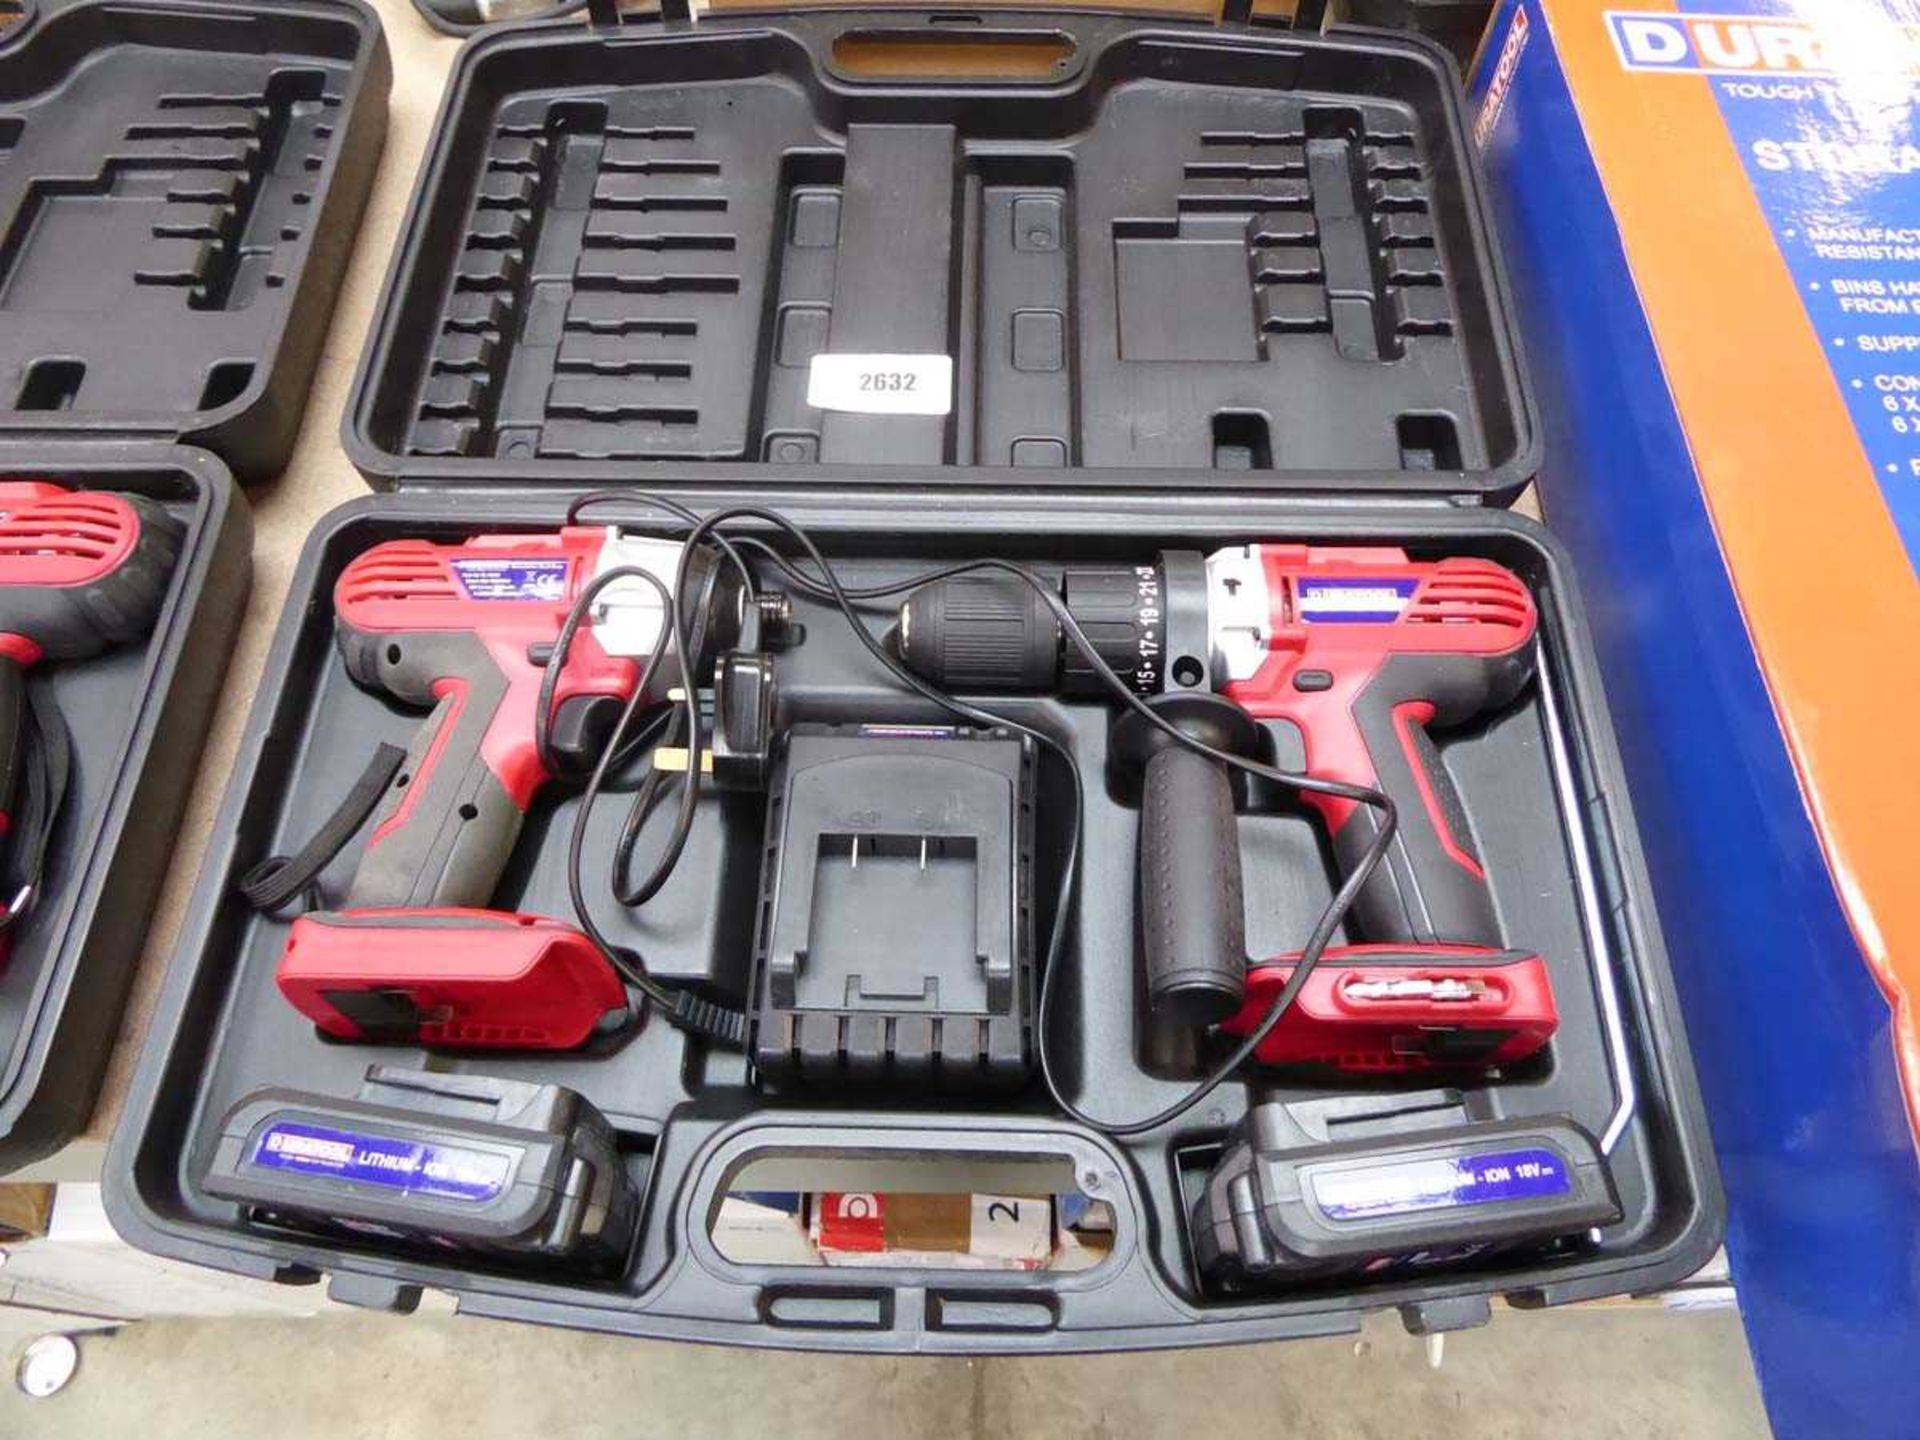 +VAT Cased Duratool cordless impact driver and screwdriver with 2 batteries and charger